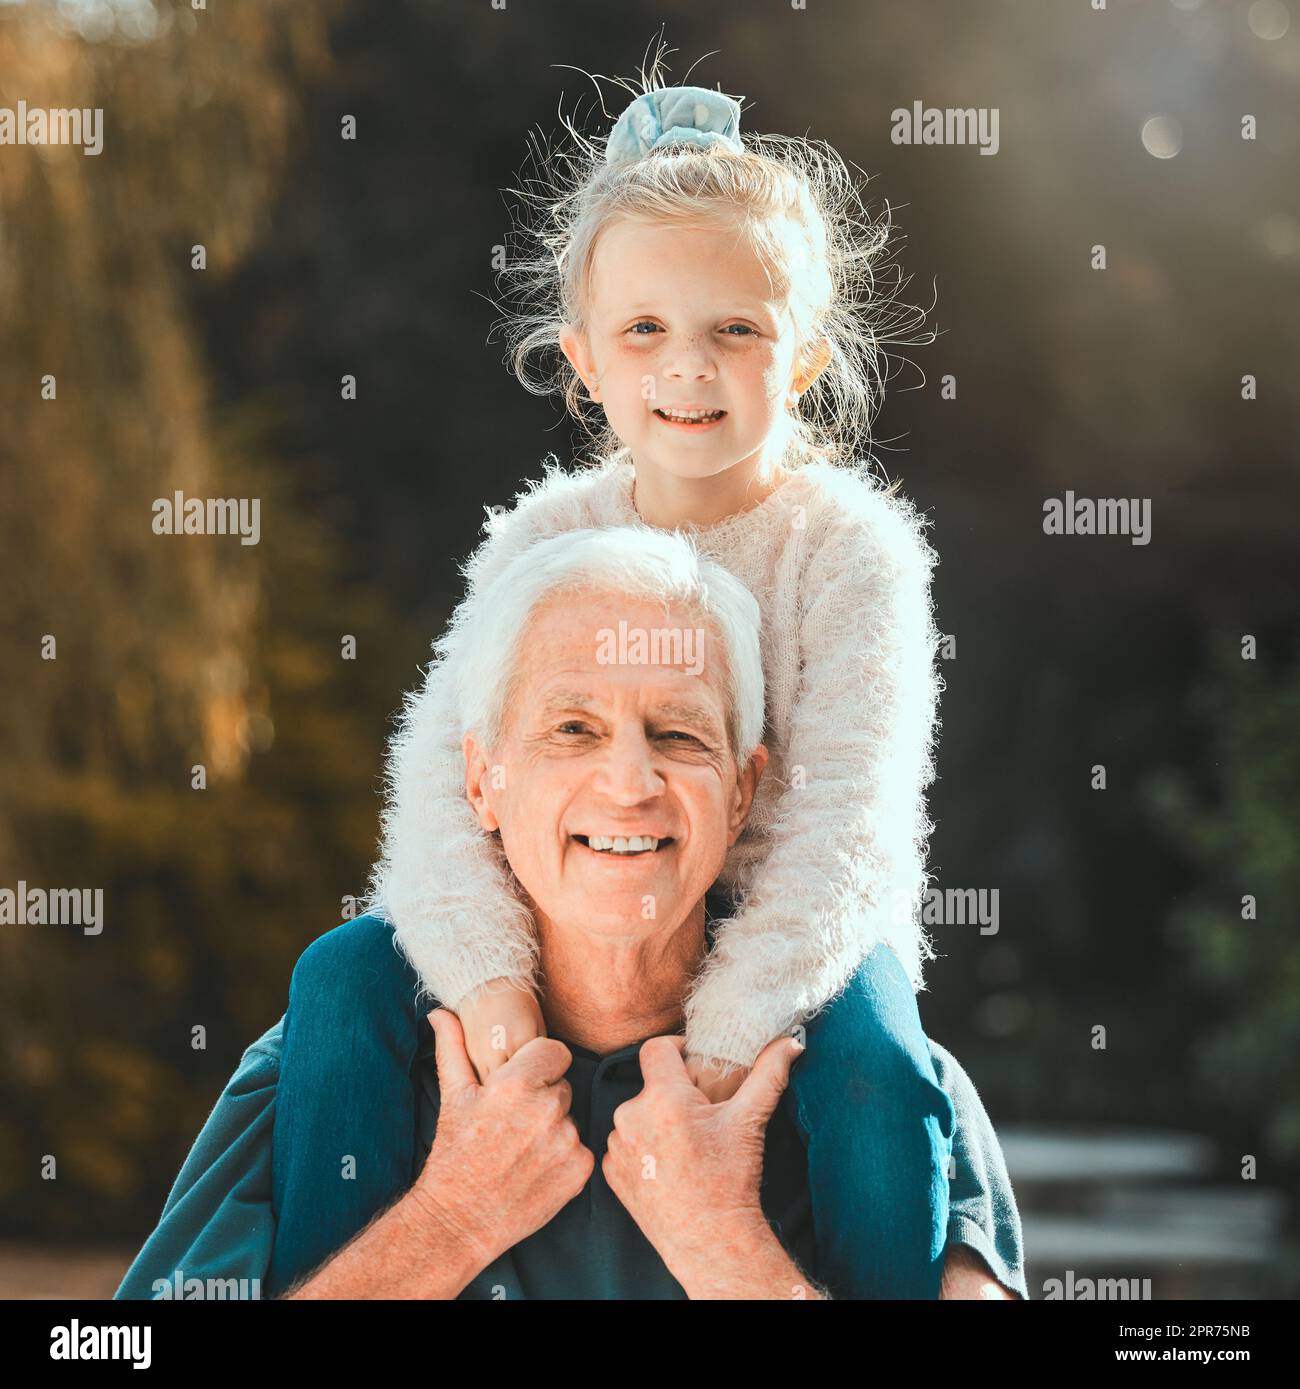 What the daughter does, the grandfather did. Shot of a girl being carried by her grandfather outside. Stock Photo